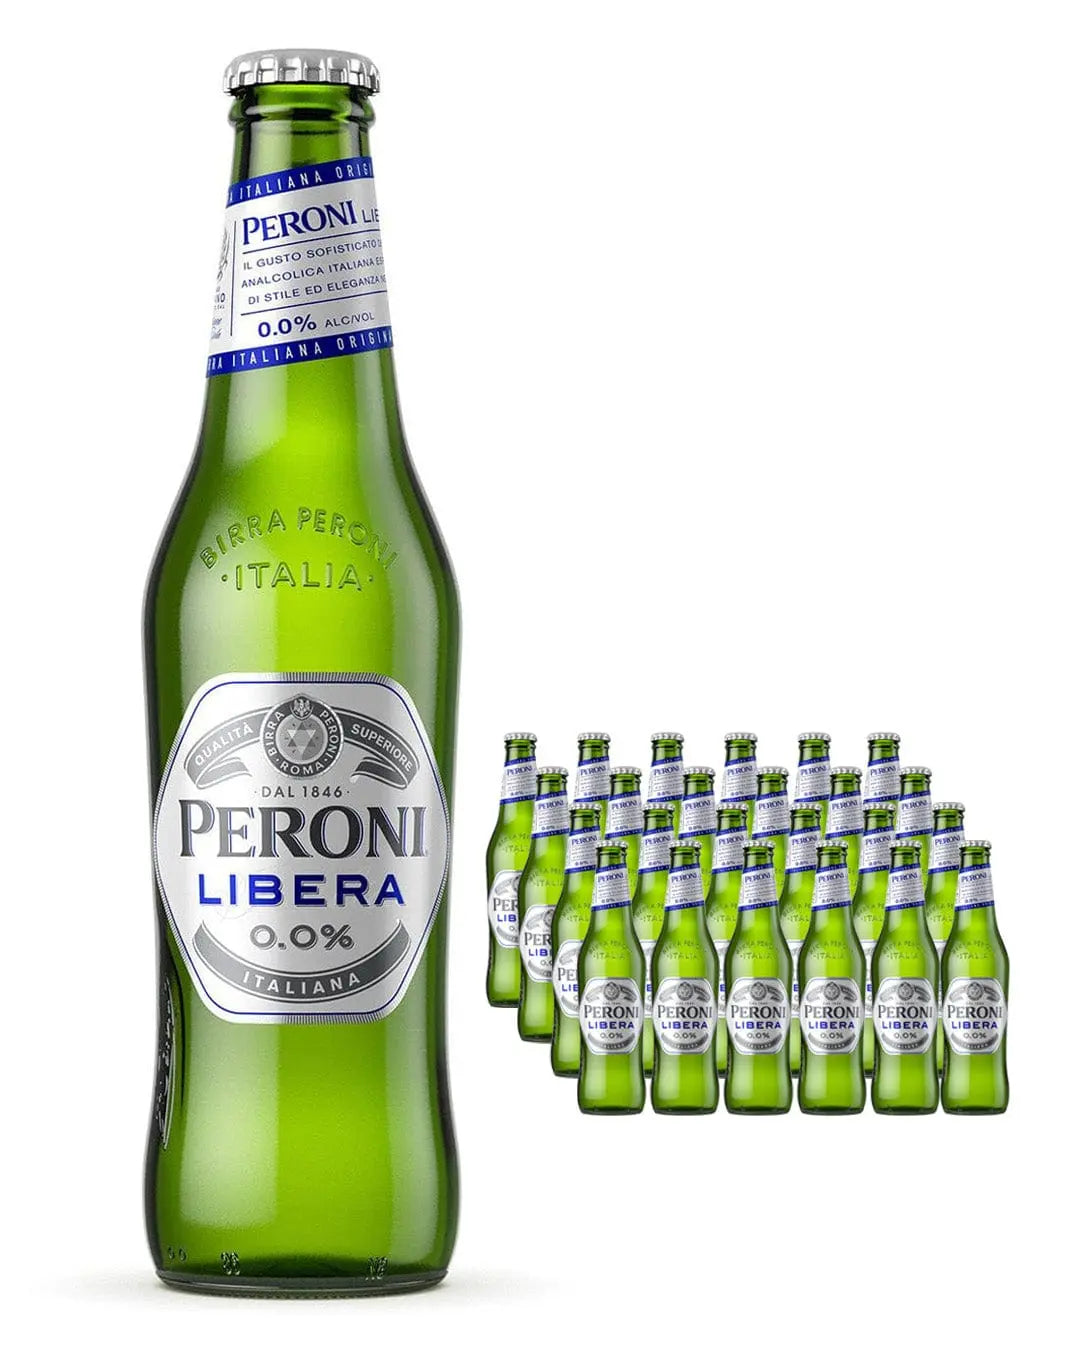 Peroni Nastro Azzurro Libera 0.0 Alcohol Free Lager Beer Bottle Multipack, 24 x 330 ml Beer